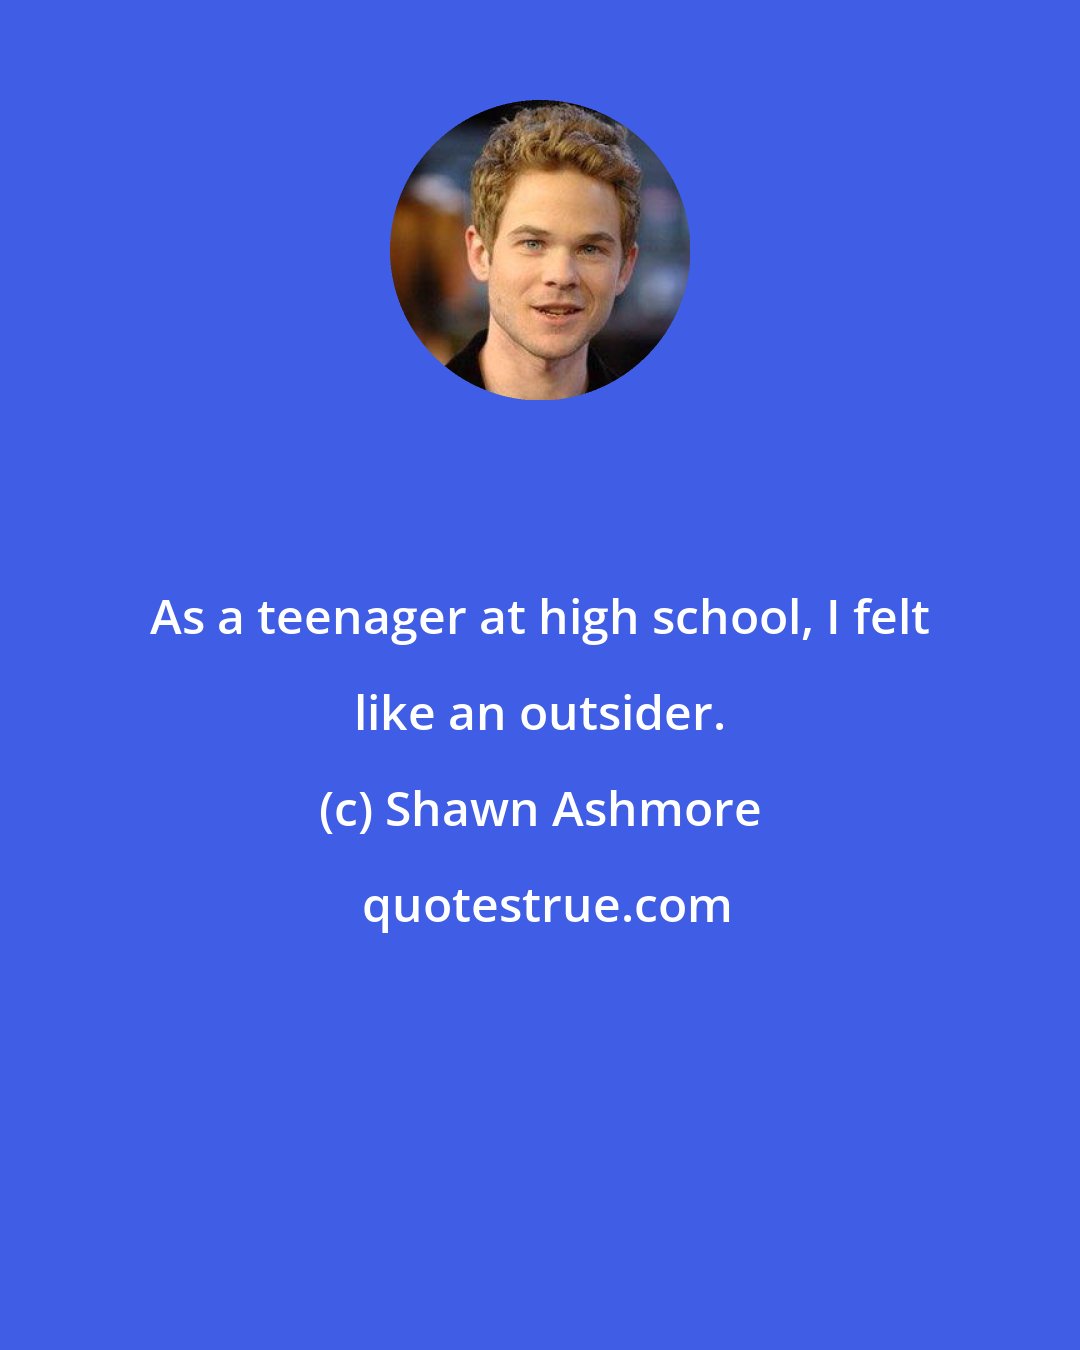 Shawn Ashmore: As a teenager at high school, I felt like an outsider.